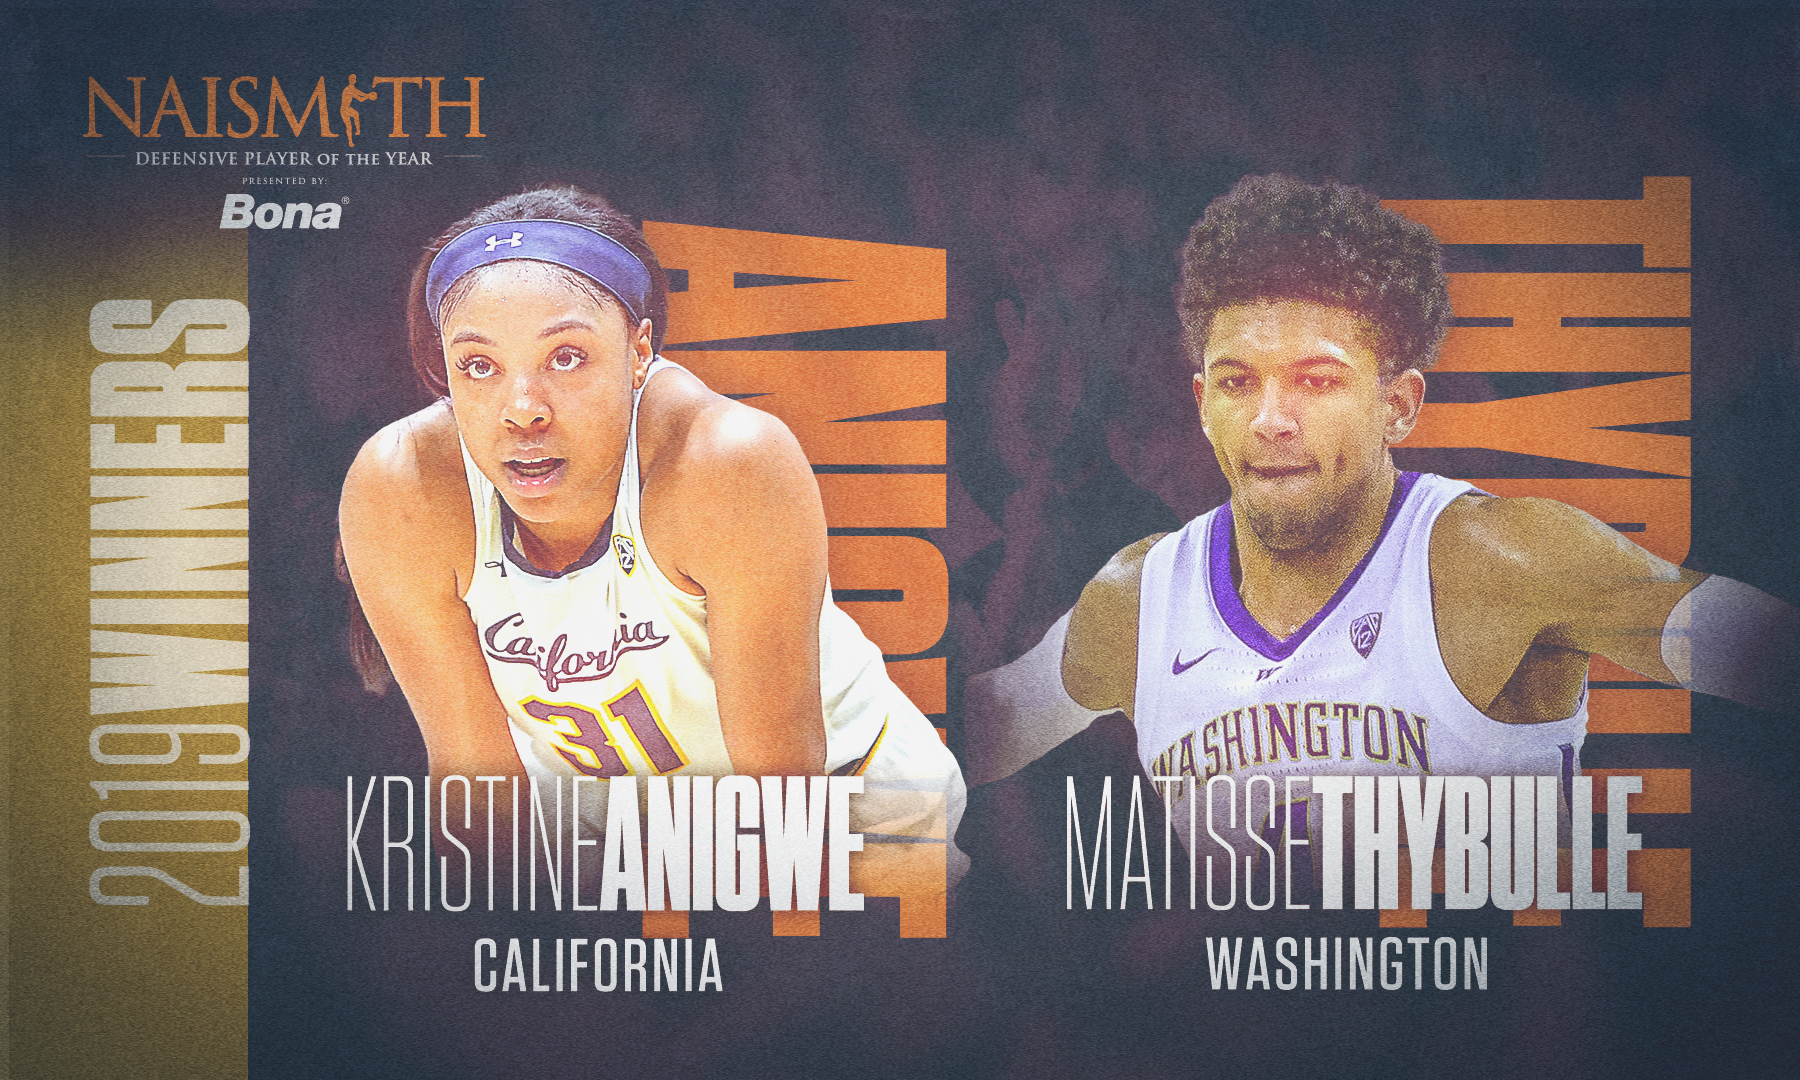 2019 Naismith Defensive Player of the Year Award presented by Bona for men’s and women’s basketball, Kristine Anigwe from California (left) and Matisse Thybulle from Washington (right) 